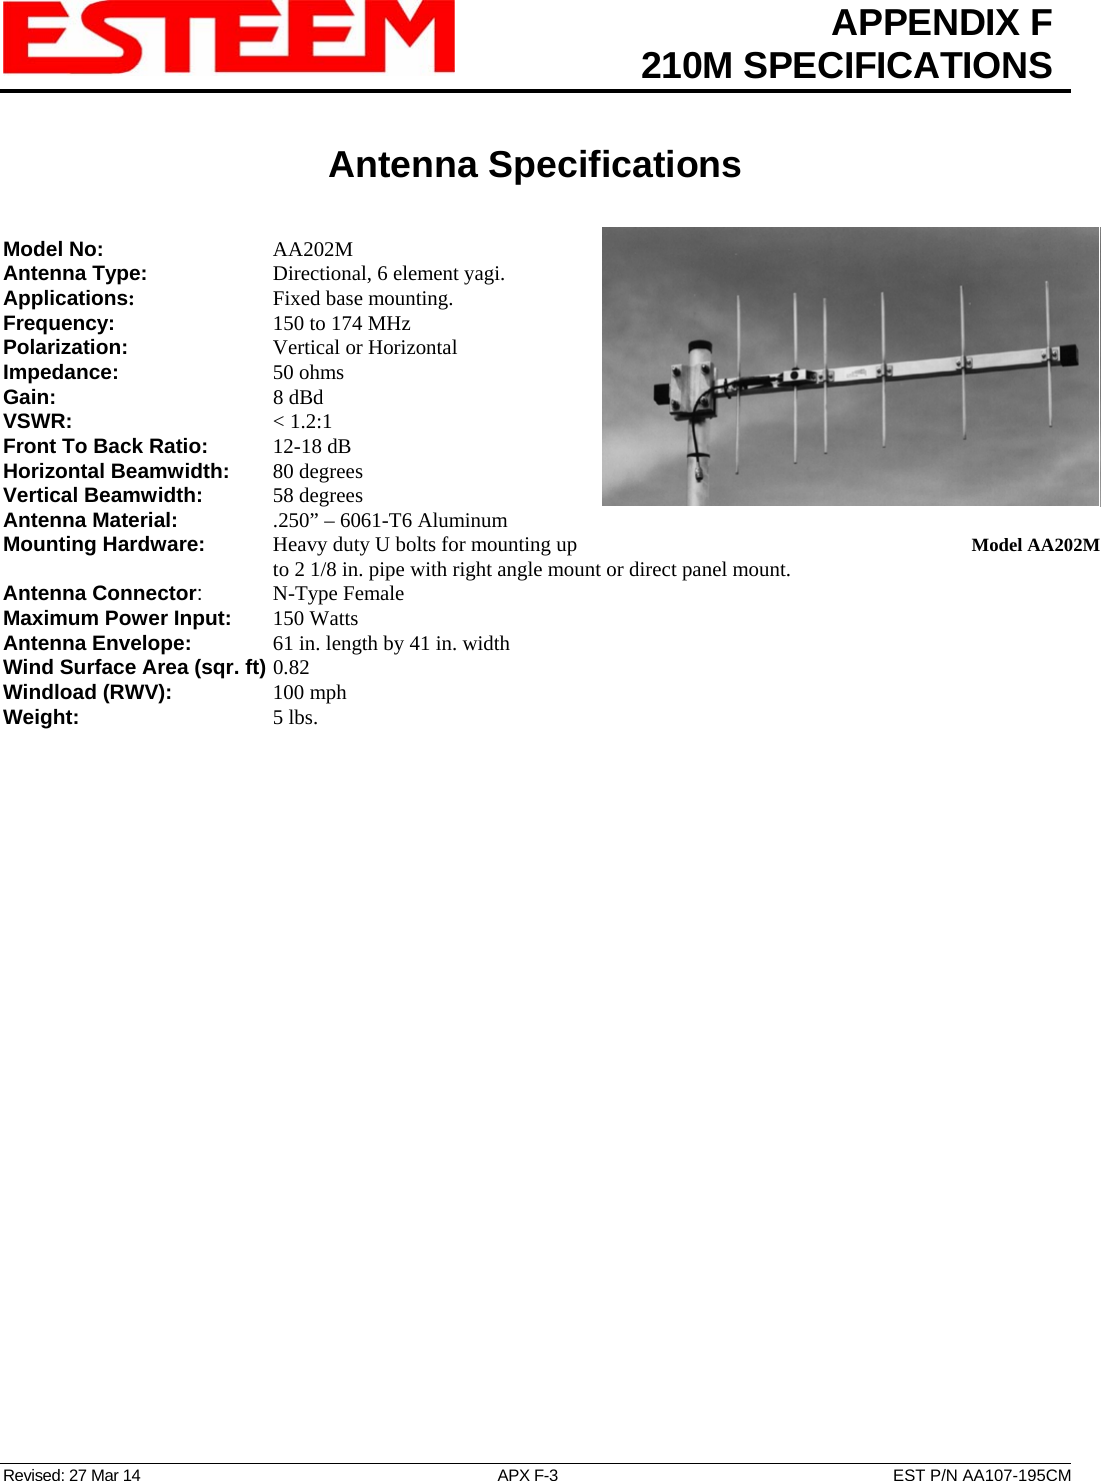  APPENDIX F  210M SPECIFICATIONS   Antenna Specifications   Revised: 27 Mar 14  APX F-3  EST P/N AA107-195CM Model No:    AA202M Antenna Type:      Directional, 6 element yagi.  Applications:    Fixed base mounting. Frequency:    150 to 174 MHz  Polarization:    Vertical or Horizontal Impedance:    50 ohms Gain:     8 dBd VSWR:      &lt; 1.2:1  Front To Back Ratio:   12-18 dB Horizontal Beamwidth:  80 degrees Vertical Beamwidth:      58 degrees Antenna Material:     .250” – 6061-T6 Aluminum  Mounting Hardware:      Heavy duty U bolts for mounting up to 2 1/8 in. pipe with right angle mount or direct panel mount.   Model AA202MAntenna Connector:   N-Type Female Maximum Power Input: 150 Watts Antenna Envelope:    61 in. length by 41 in. width Wind Surface Area (sqr. ft) 0.82 Windload (RWV):   100 mph Weight:     5 lbs.        